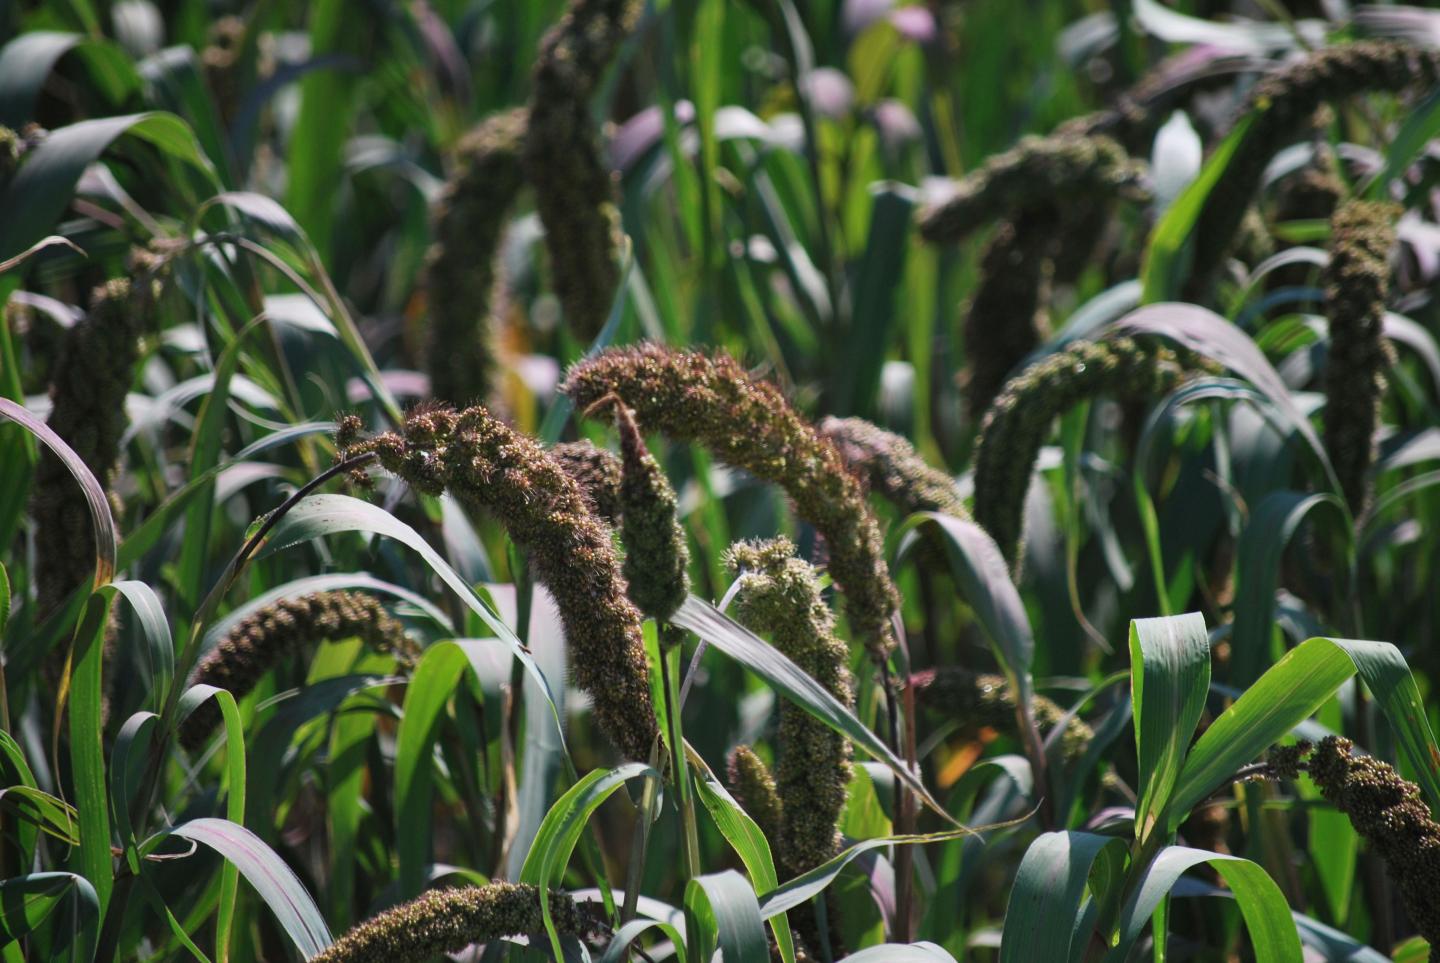 Foxtail Millet, An Early and Important Domesticate in South-East Asia